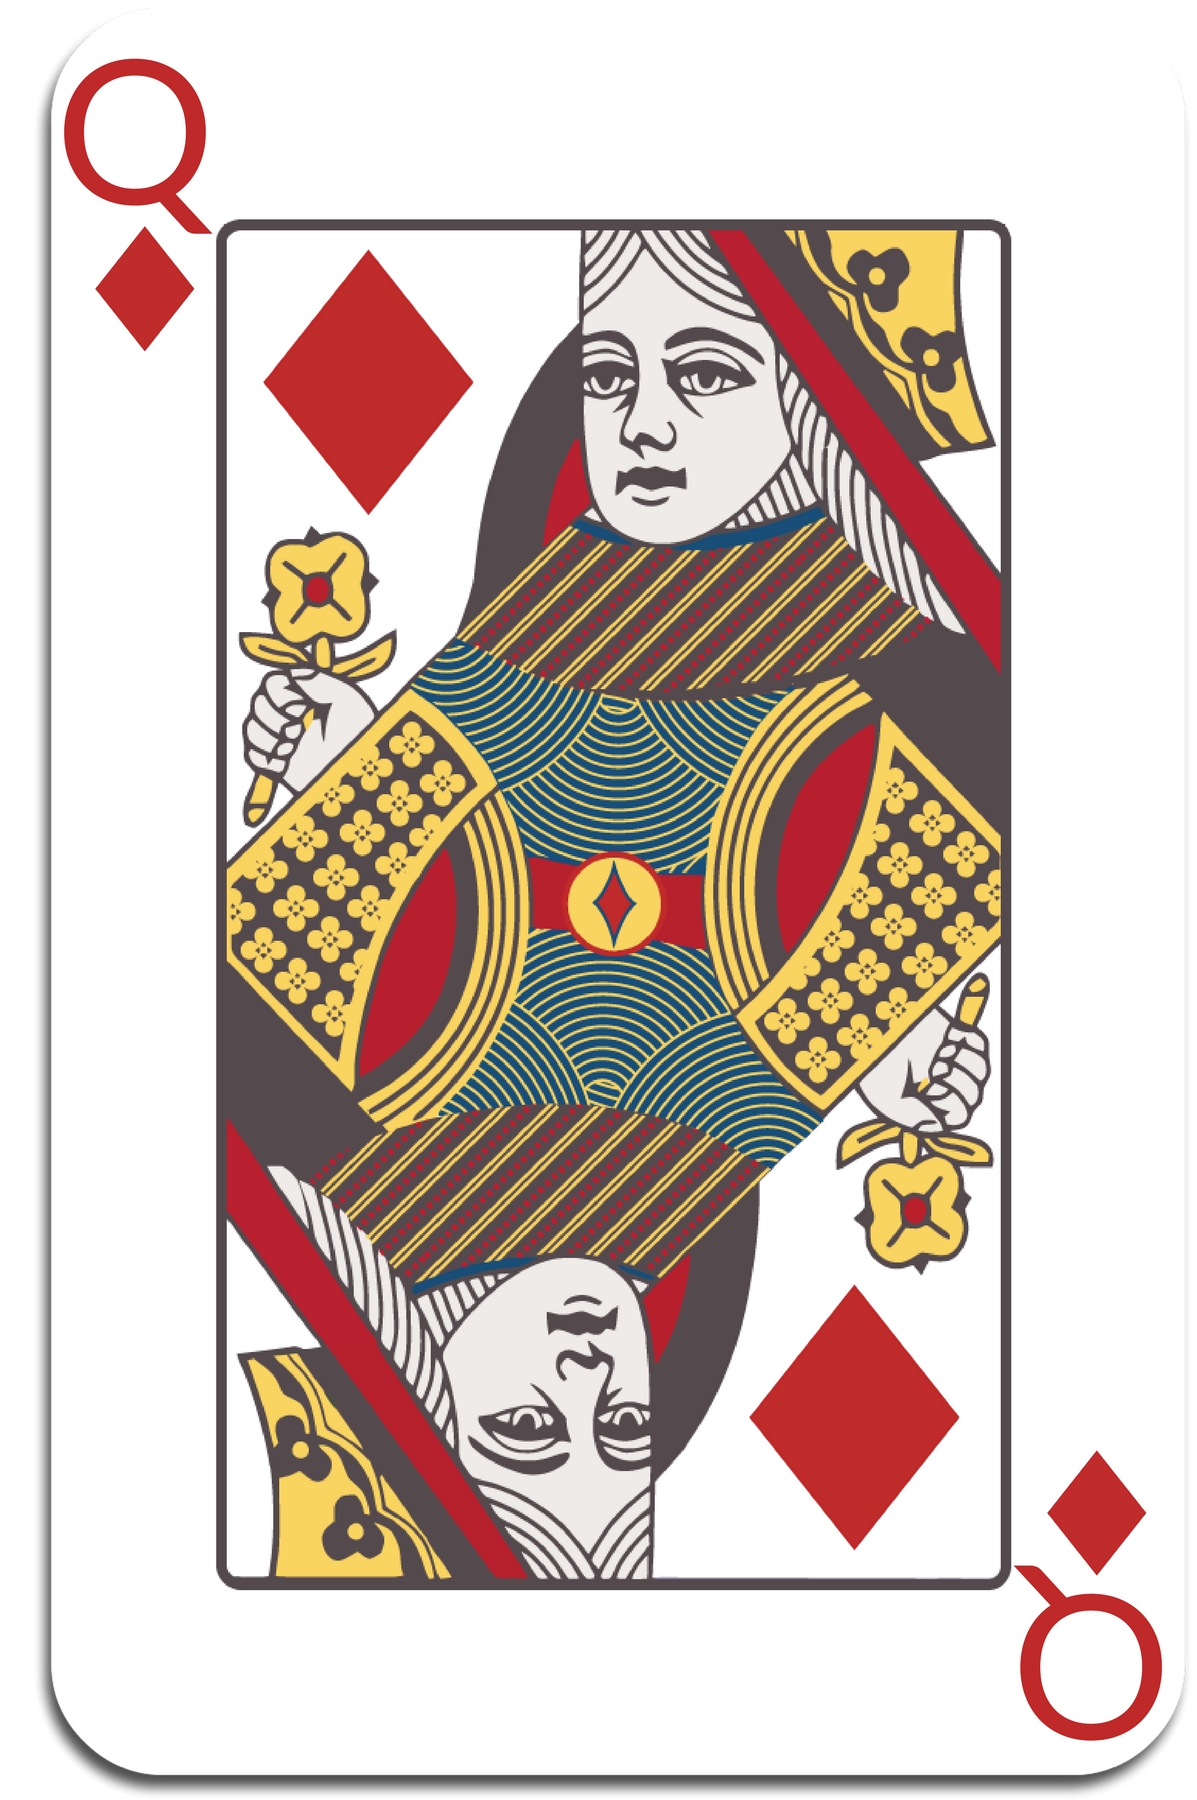 Queen of Diamonds Player's Guide